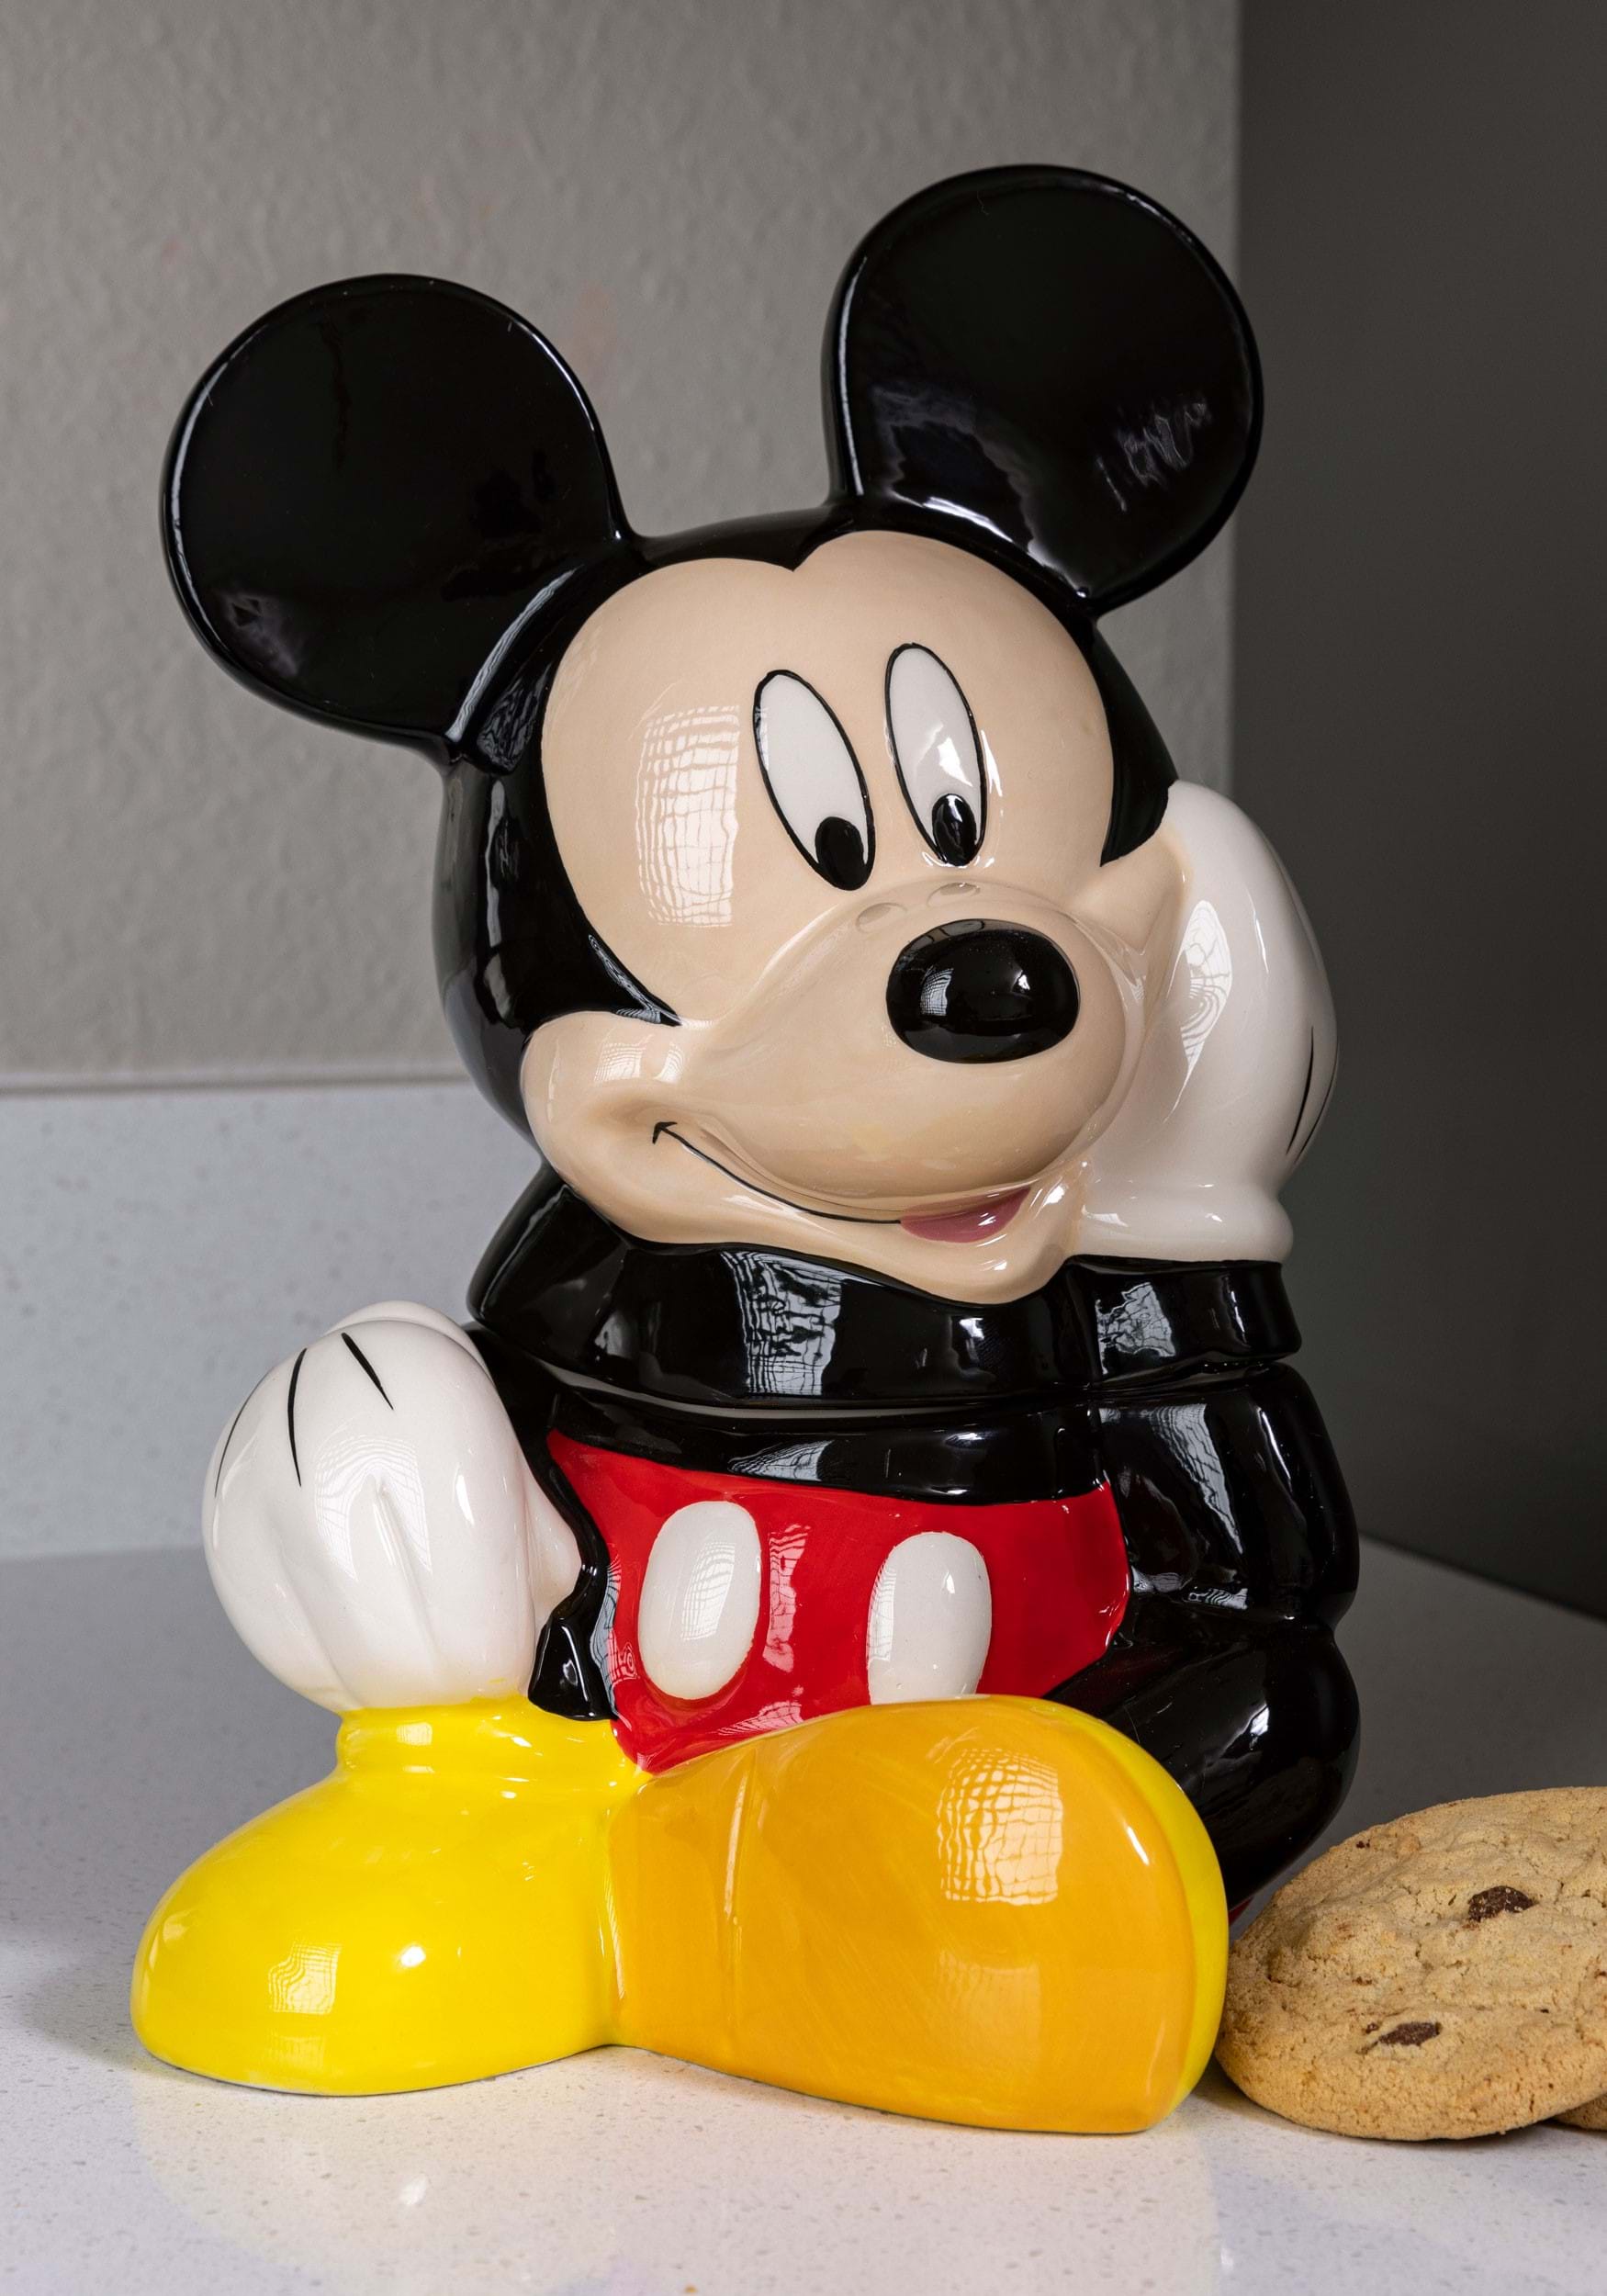 https://images.fun.com/products/68111/1-1/mickey-mouse-ceramic-cookie-jar.jpg